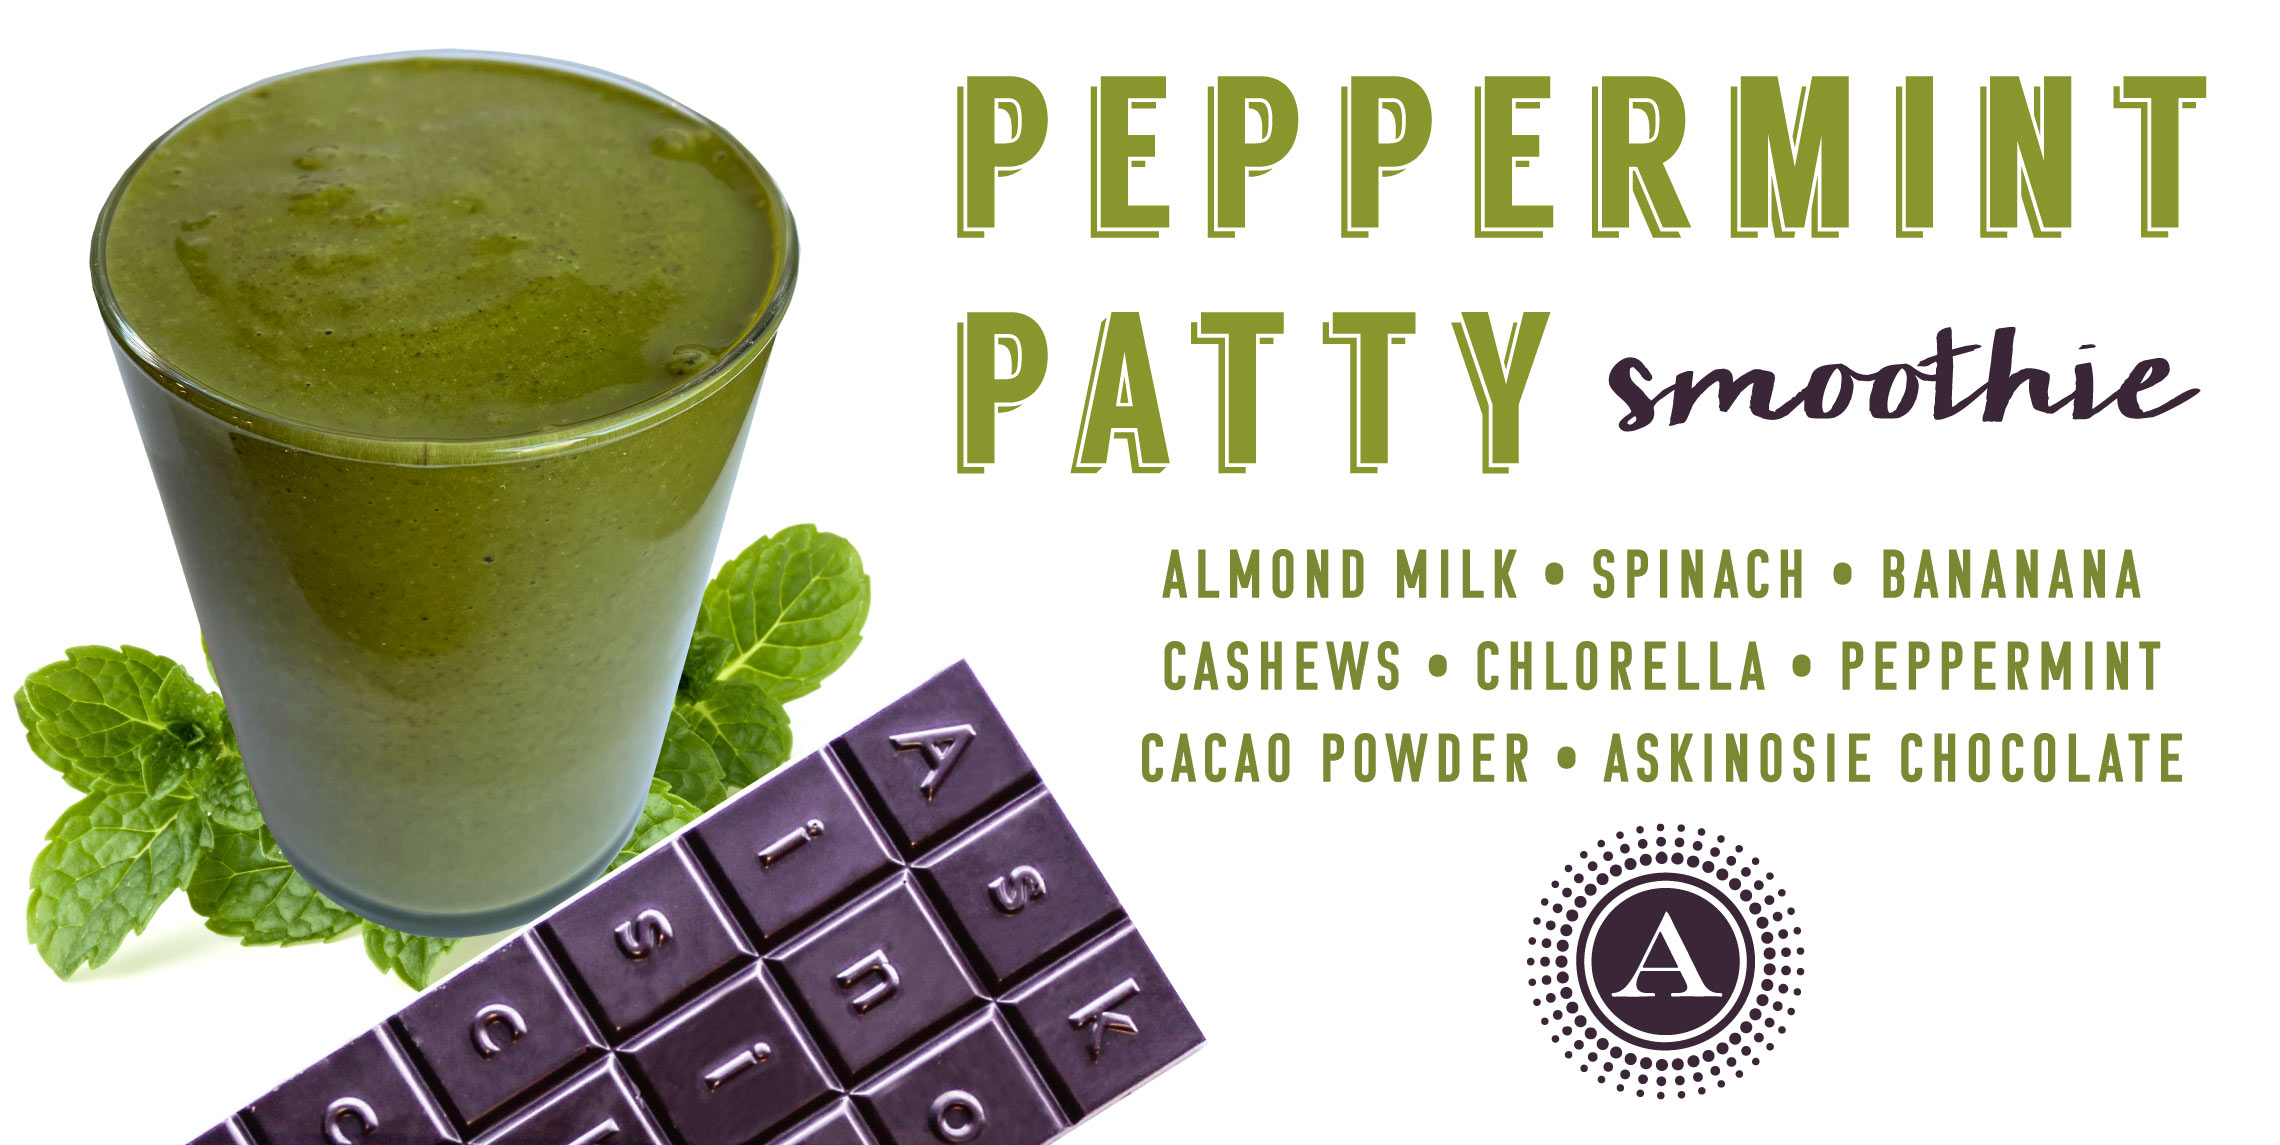 peppermint patty smoothie spring